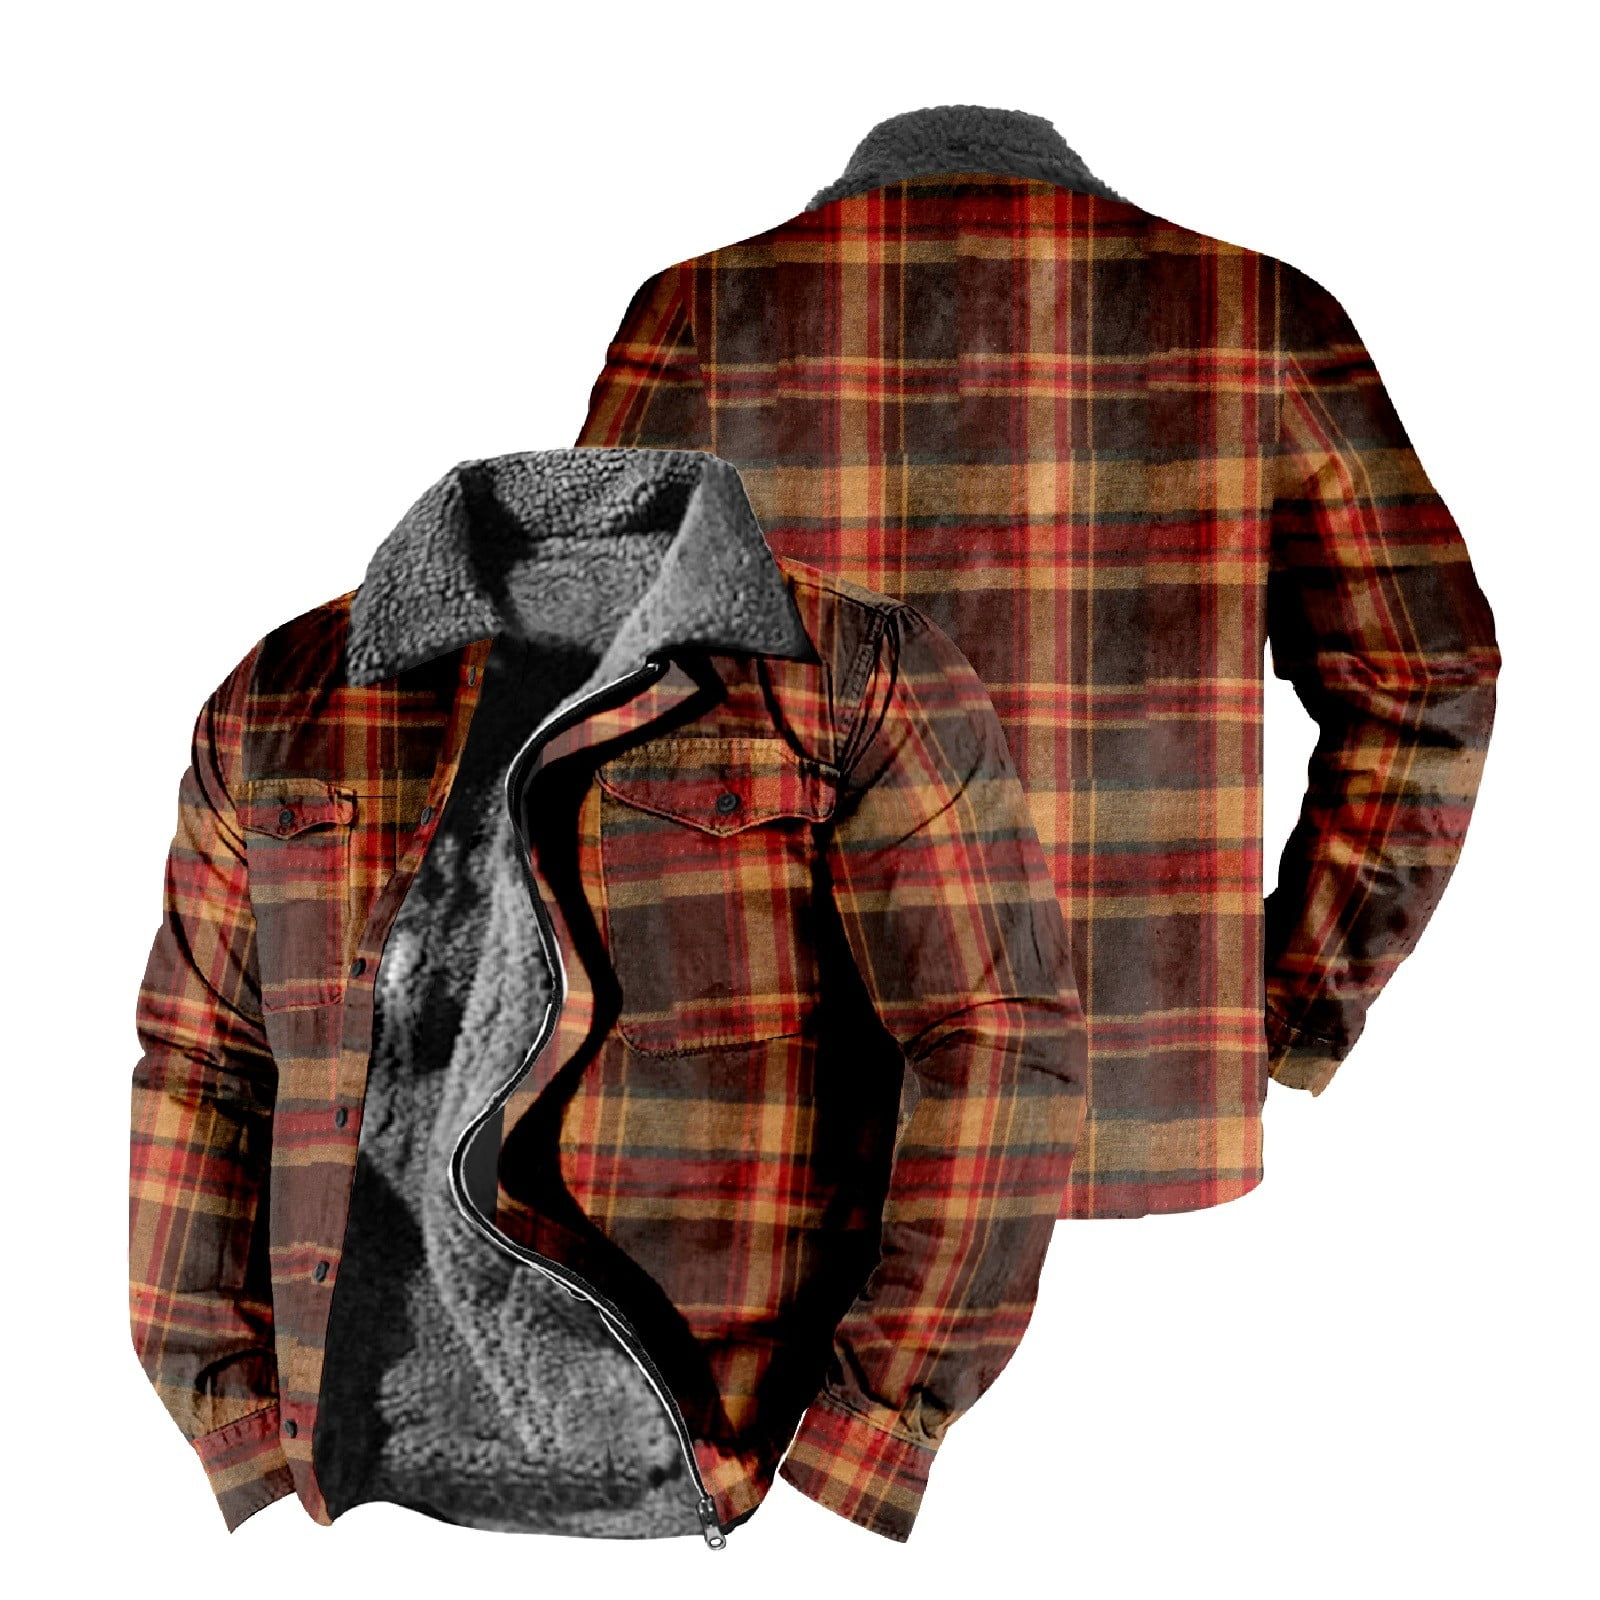 Gyouwnll Men's Warm Lined Wool Plaid Shirt Jacket - Classic Style for ...